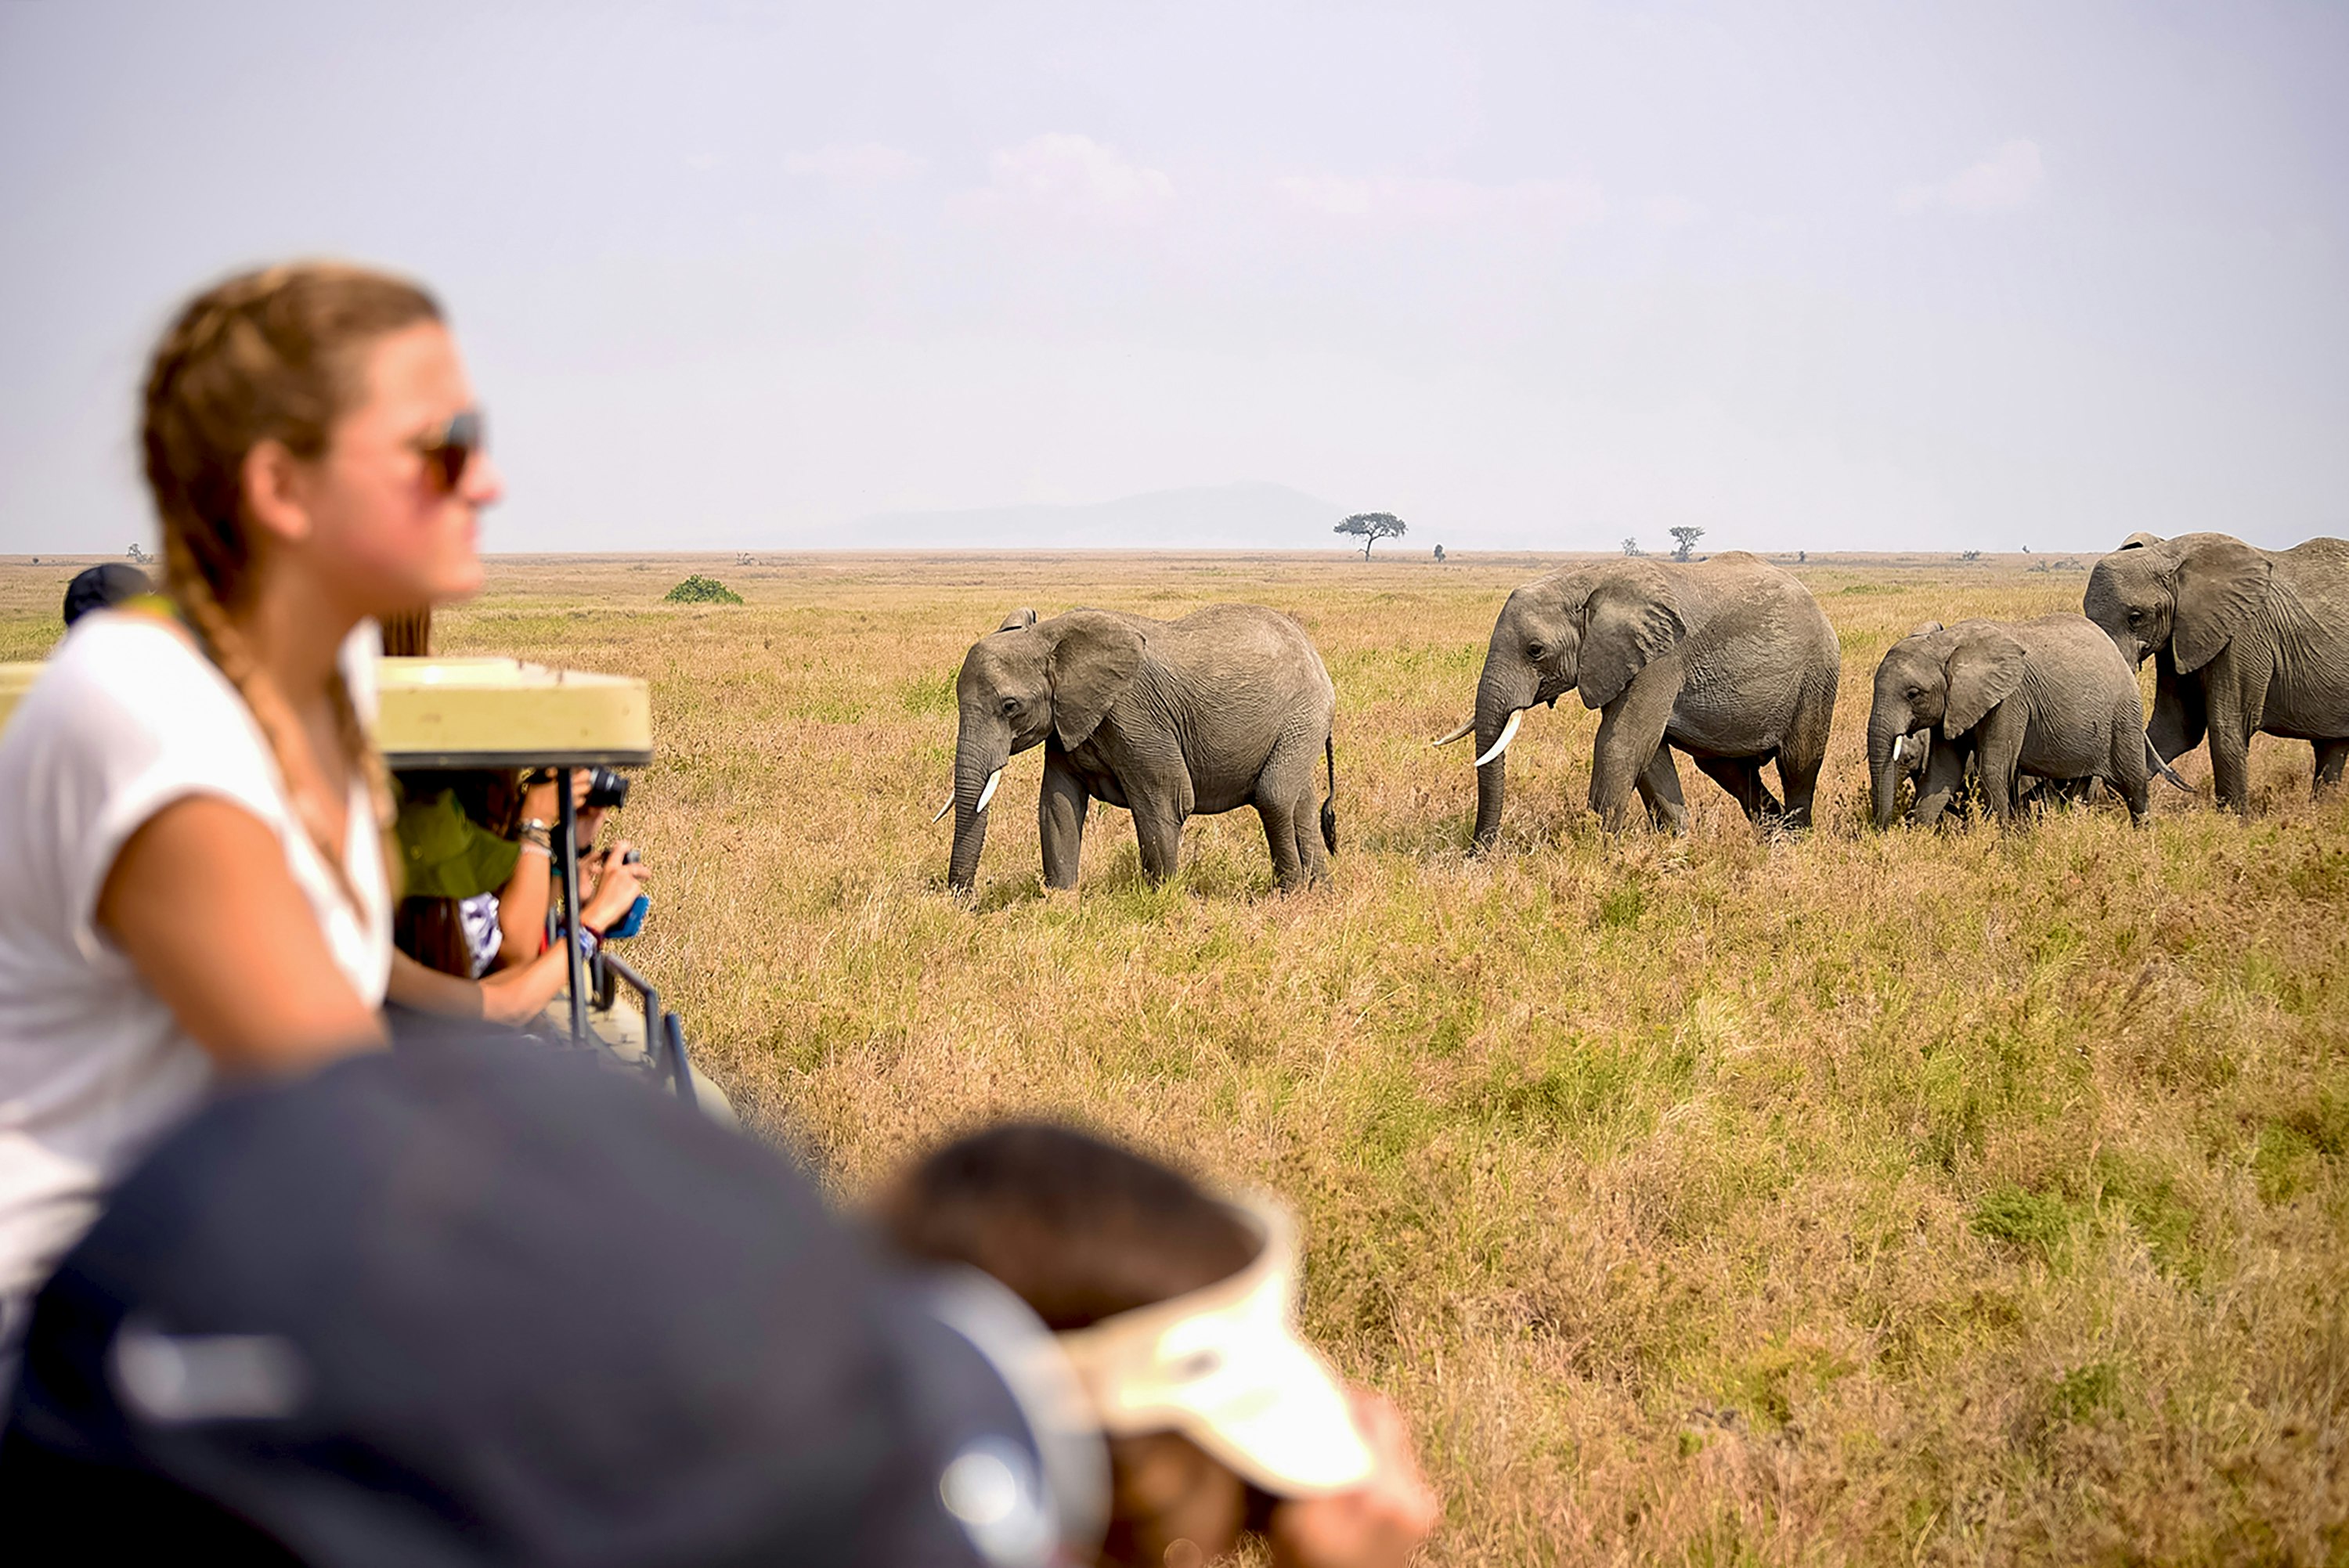 Animal Adventures: Where Students Can Best Learn About Wildlife While Traveling